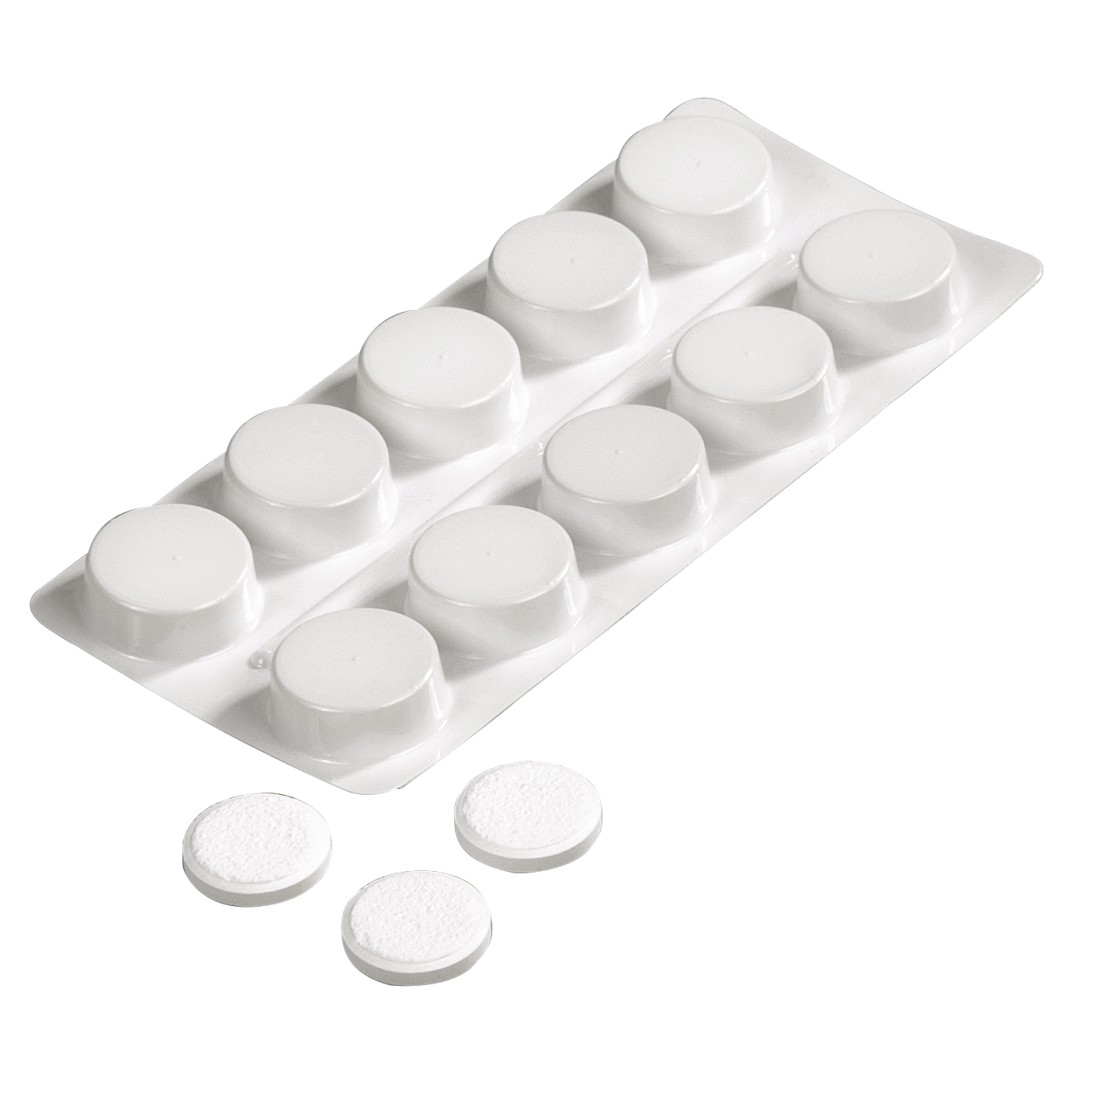 abx3 High-Res Image 3 - Xavax, Cleaning Tablets for Bottles, 30 Packs in Display